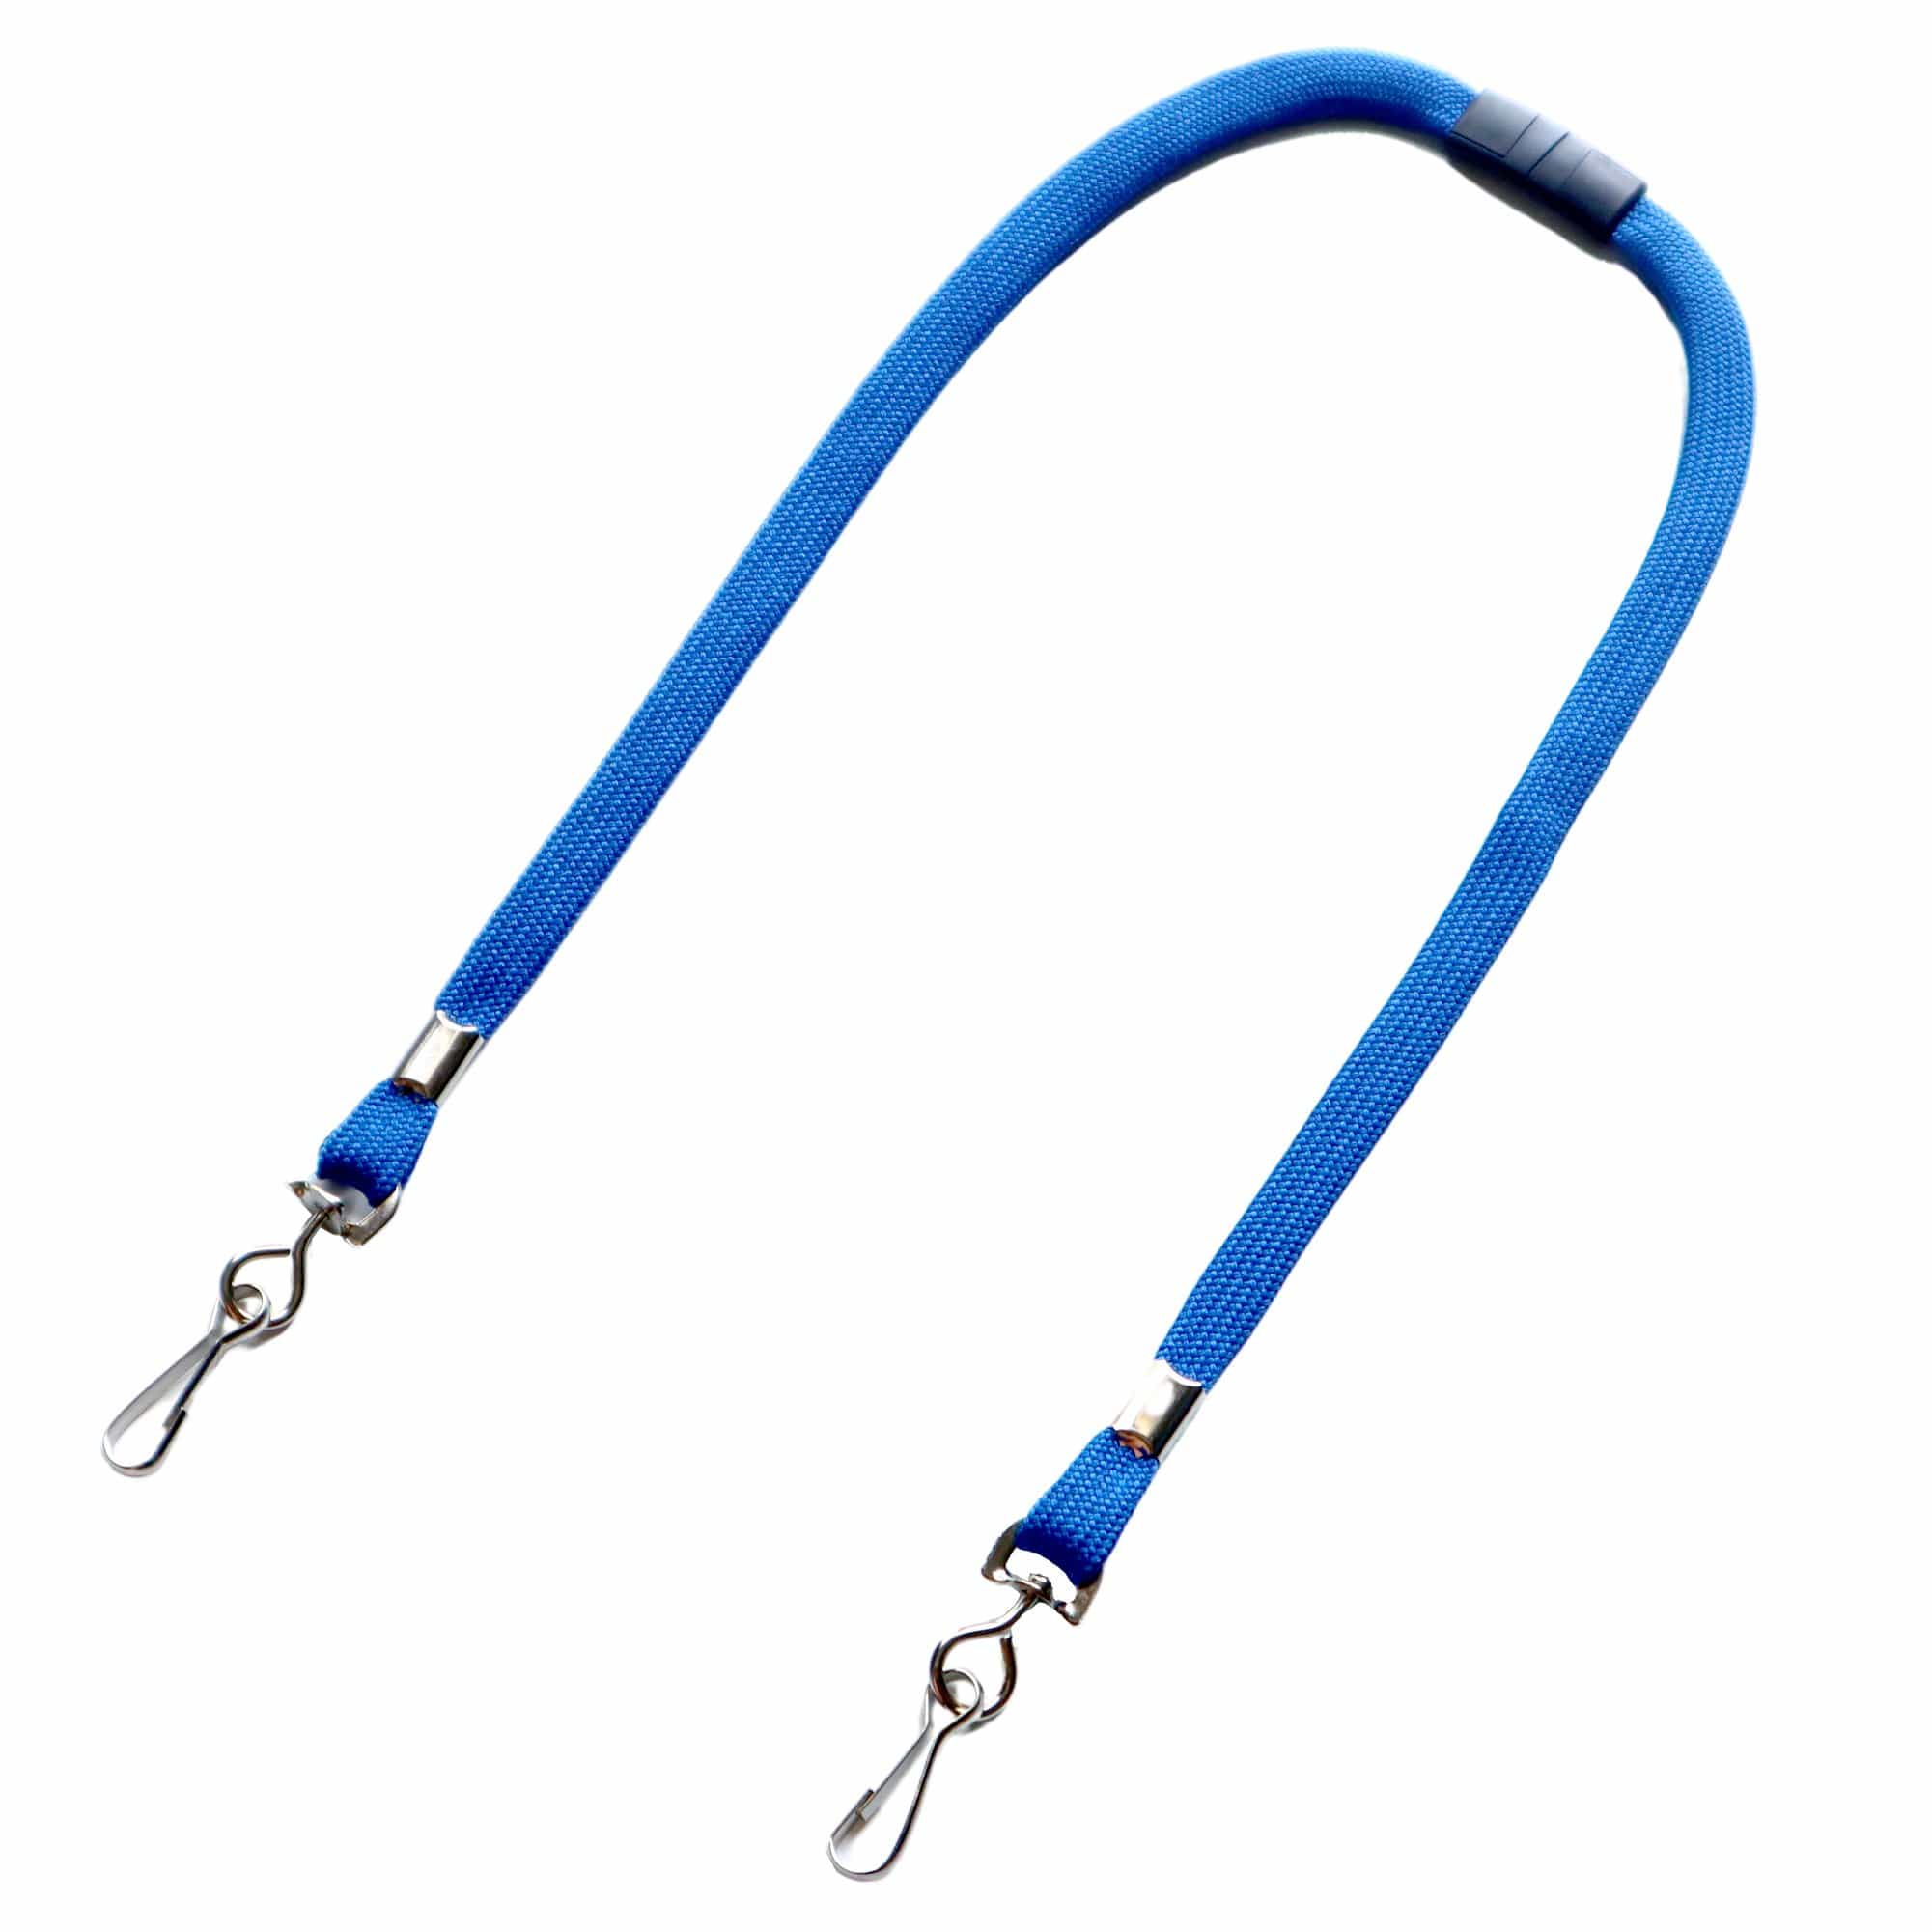 Kids Safe Double Ended Lanyards with Safety Breakaway Clasp and Two Hook Endings - Short Length for Children